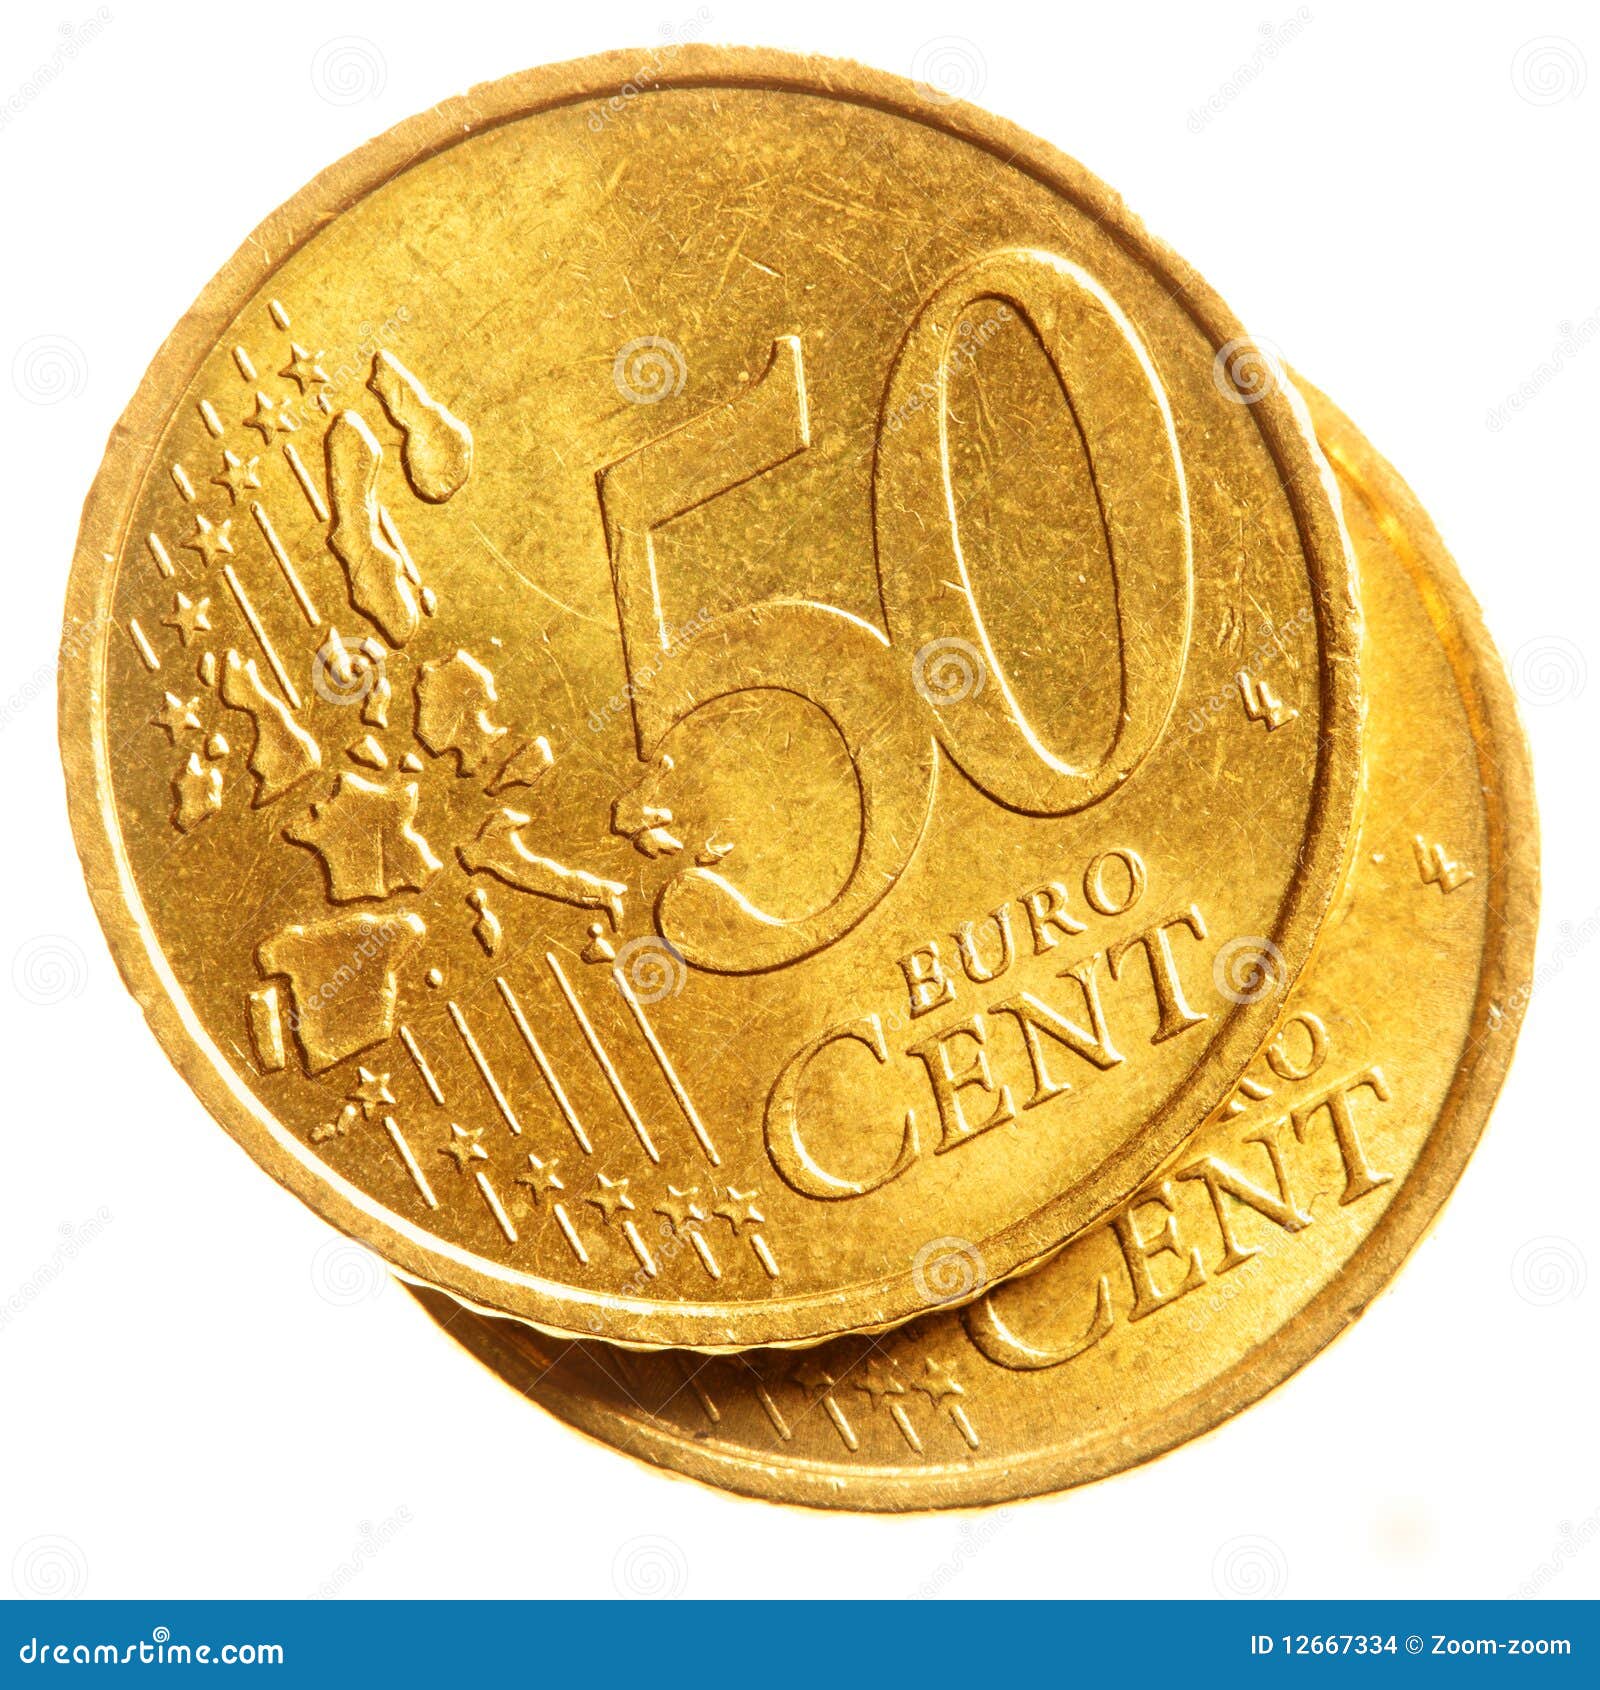 Fifty euro cent coins stock photo. Image of loan, germany - 12667334